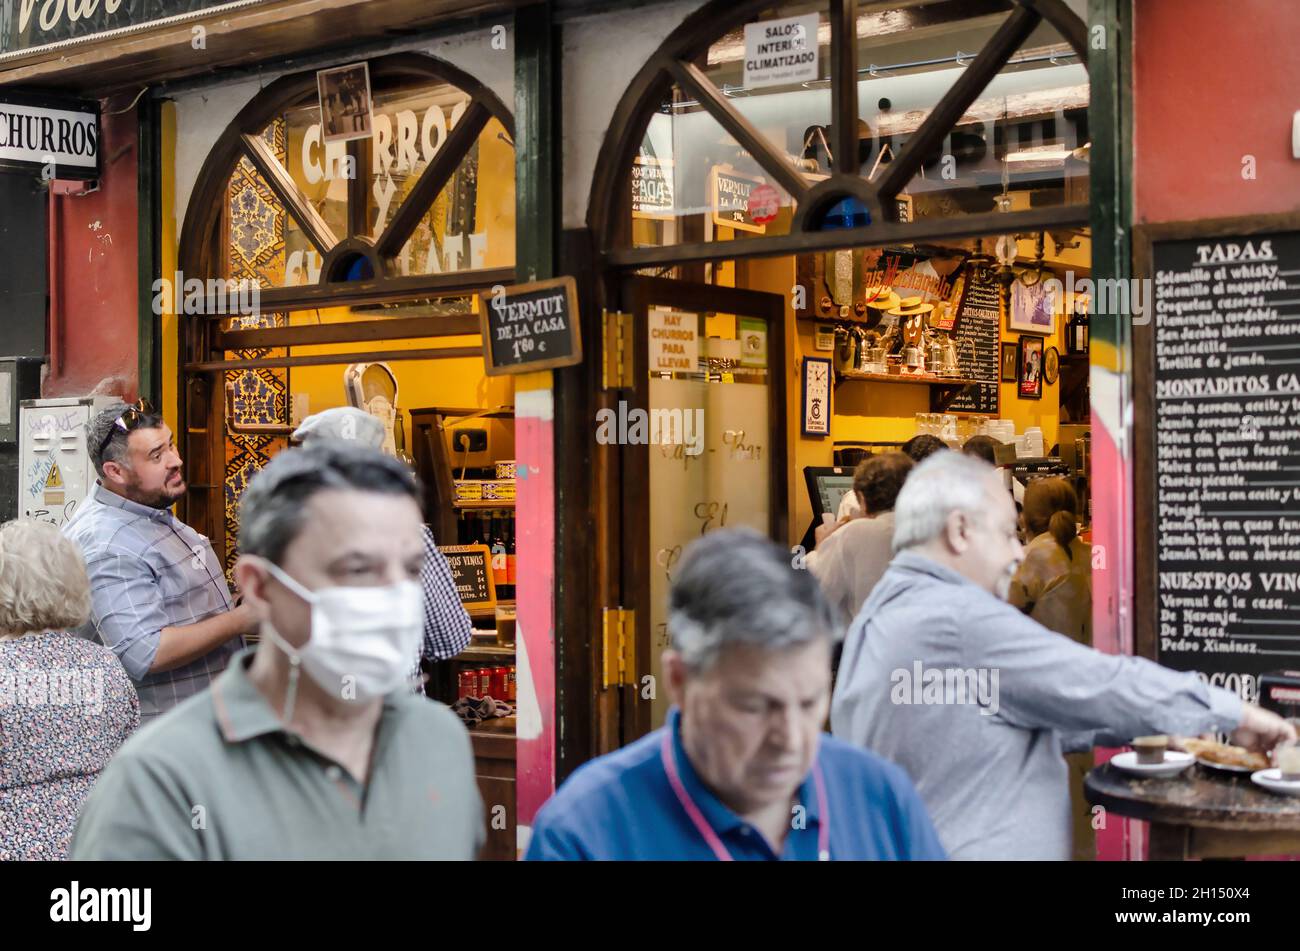 Seville, Spain; October 16, 2021: Post pandemic street photography. Stock Photo